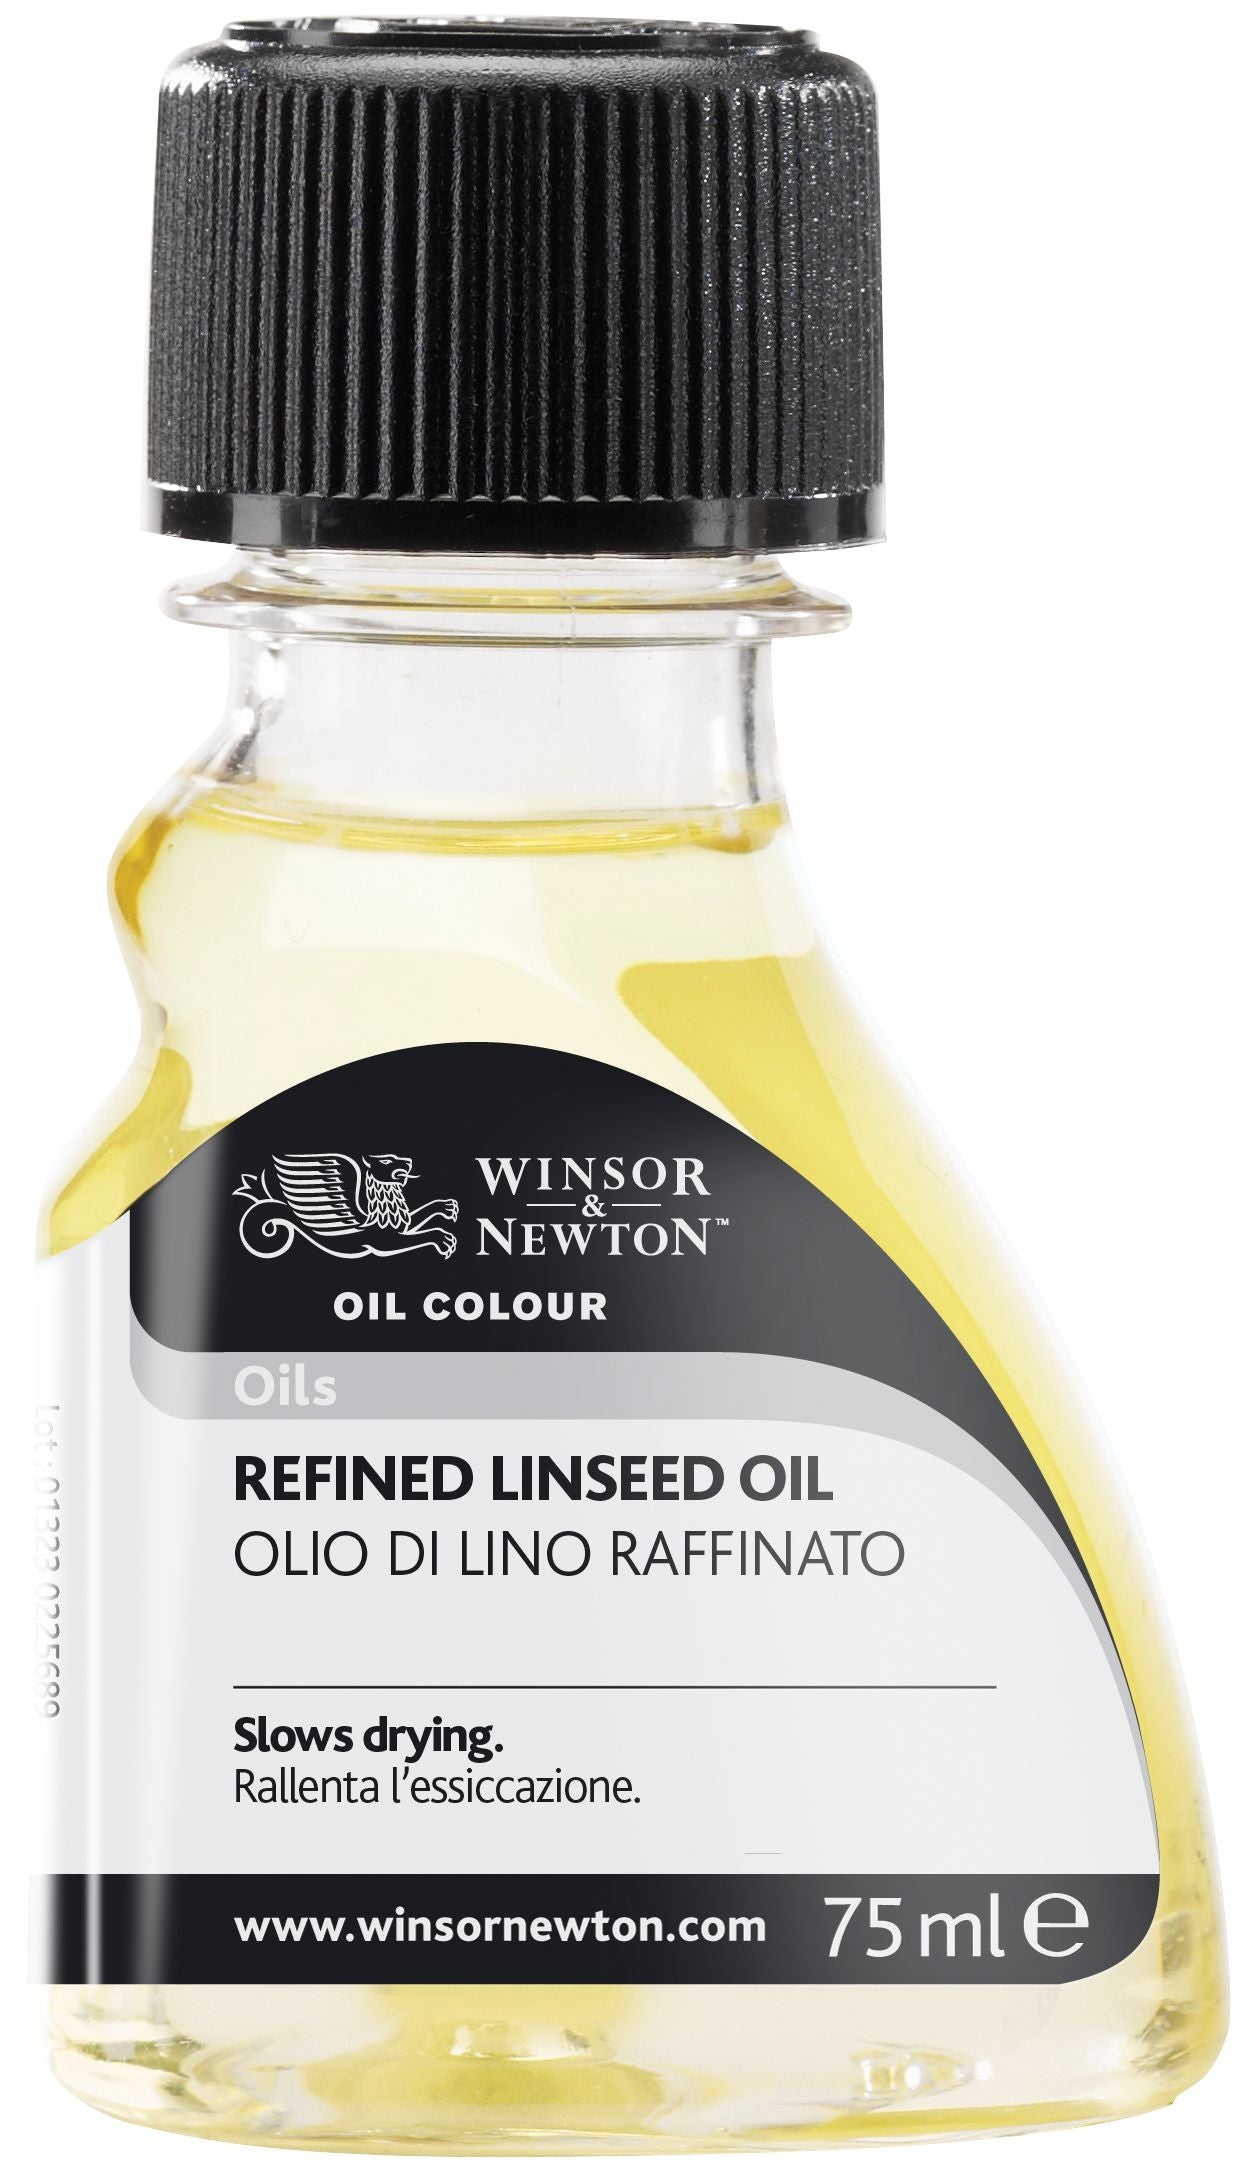 Winsor and Newton Refined Linseed Oil 75ml